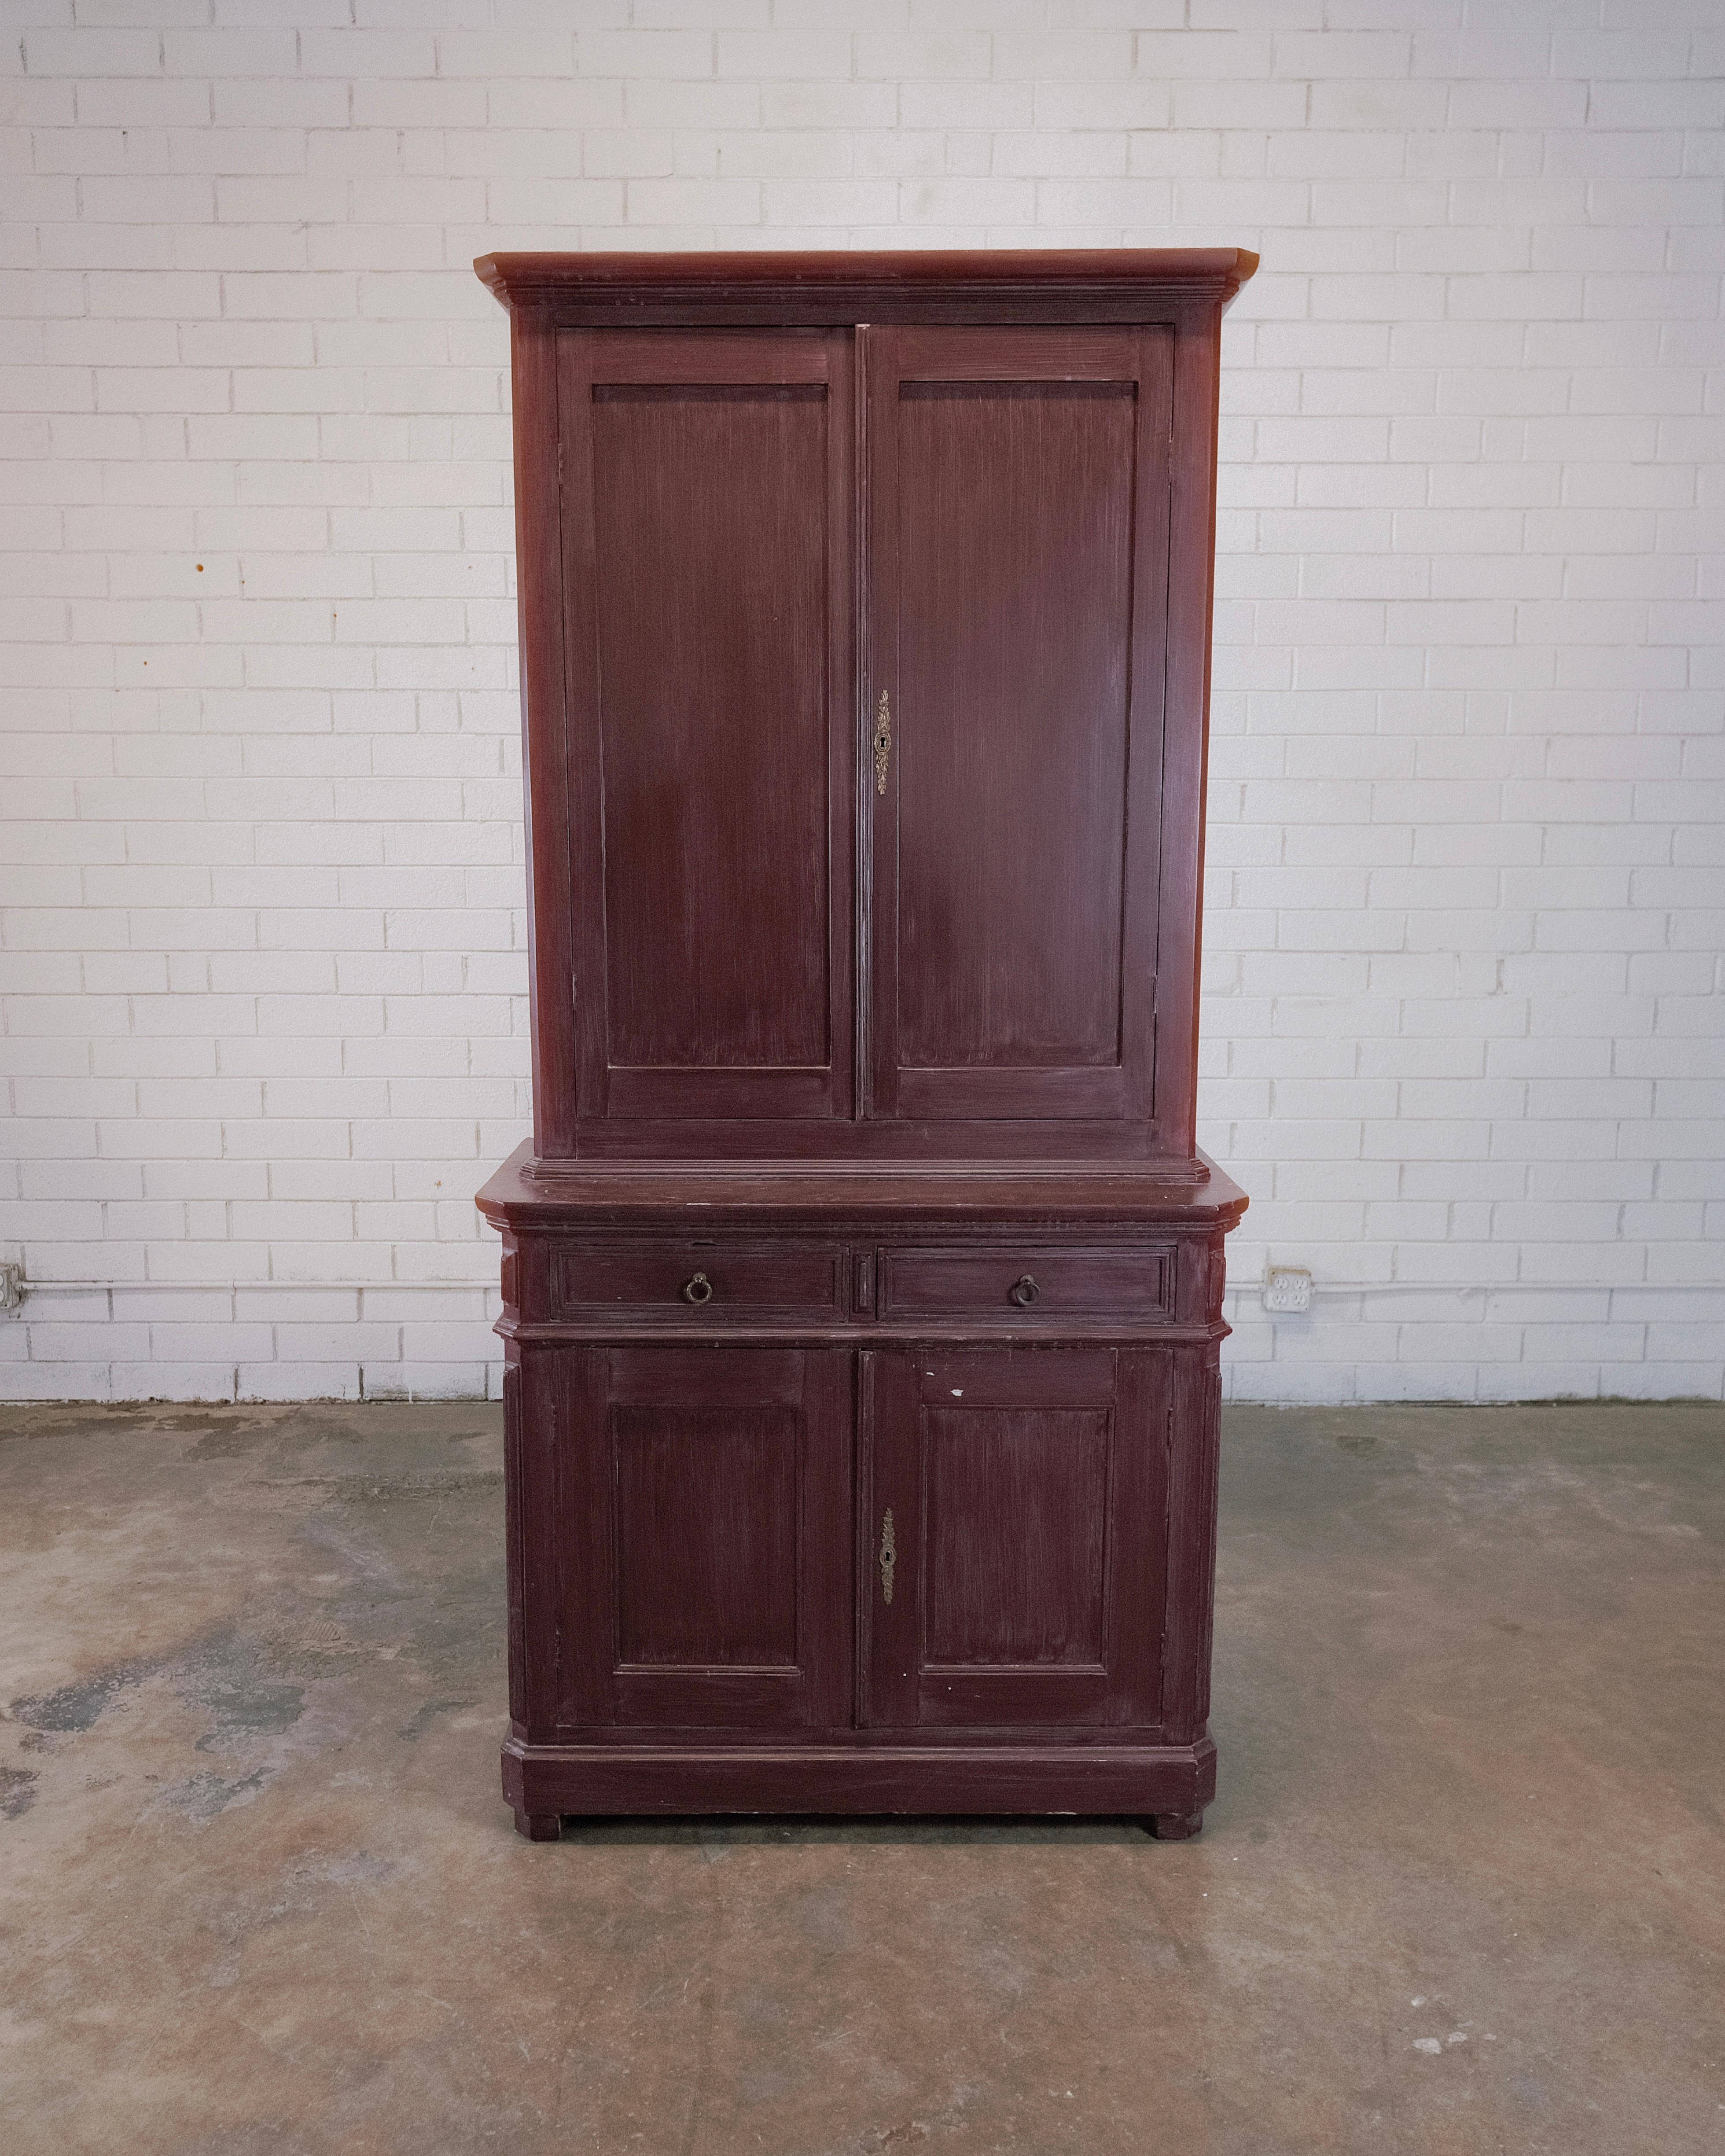 Antique Two-Piece Pine Cupboard with Colorful Interior In Good Condition For Sale In High Point, NC